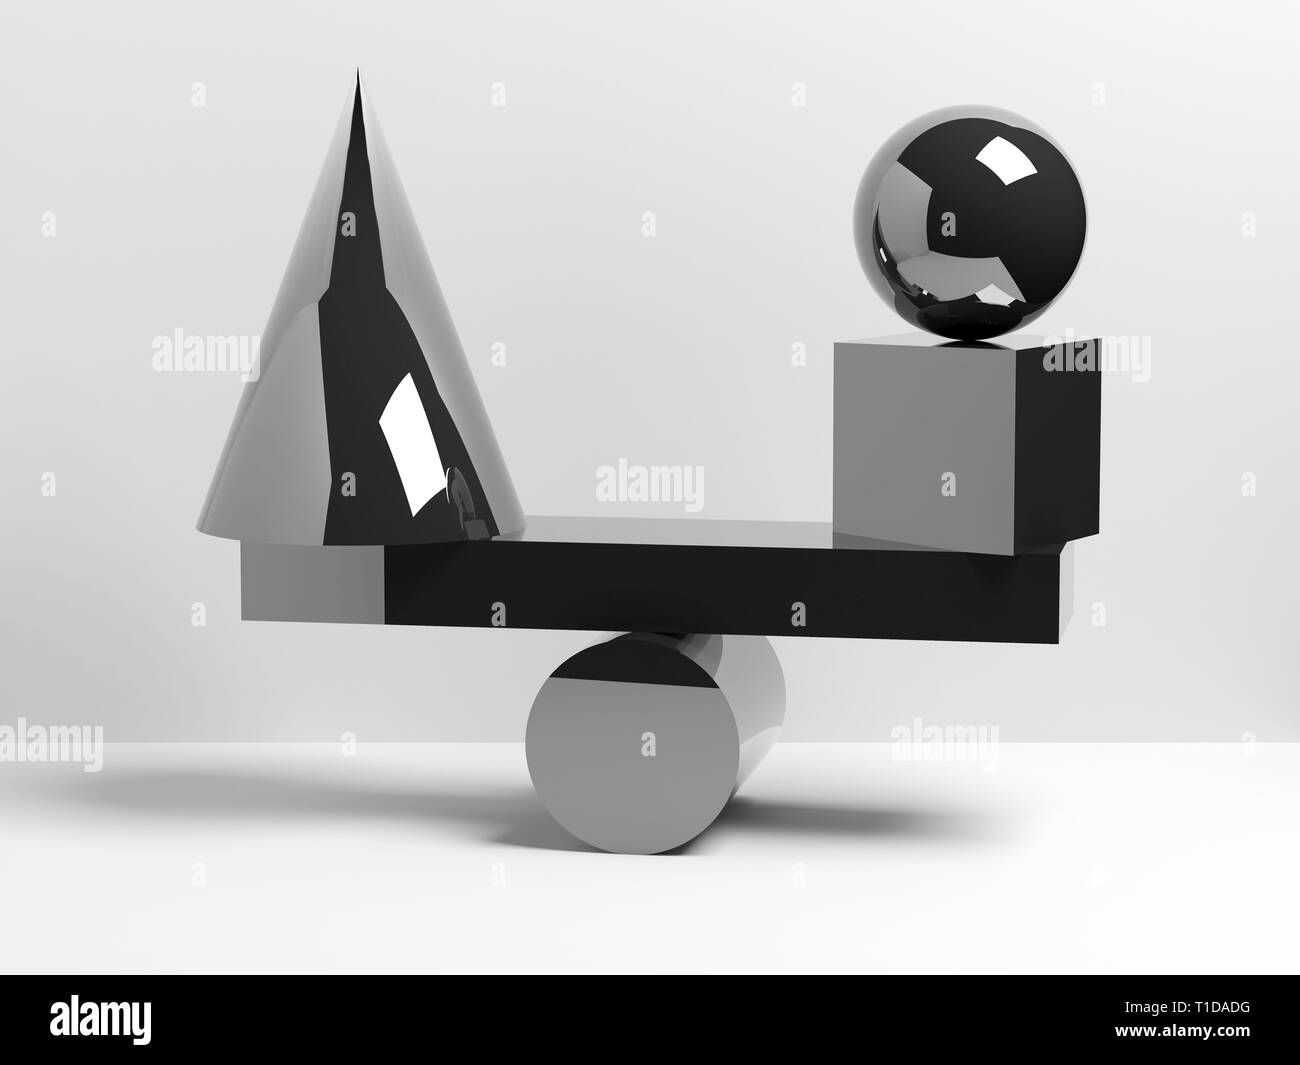 Abstract equilibrium installation of balancing glossy black geometric shapes. 3d render illustration Stock Photo